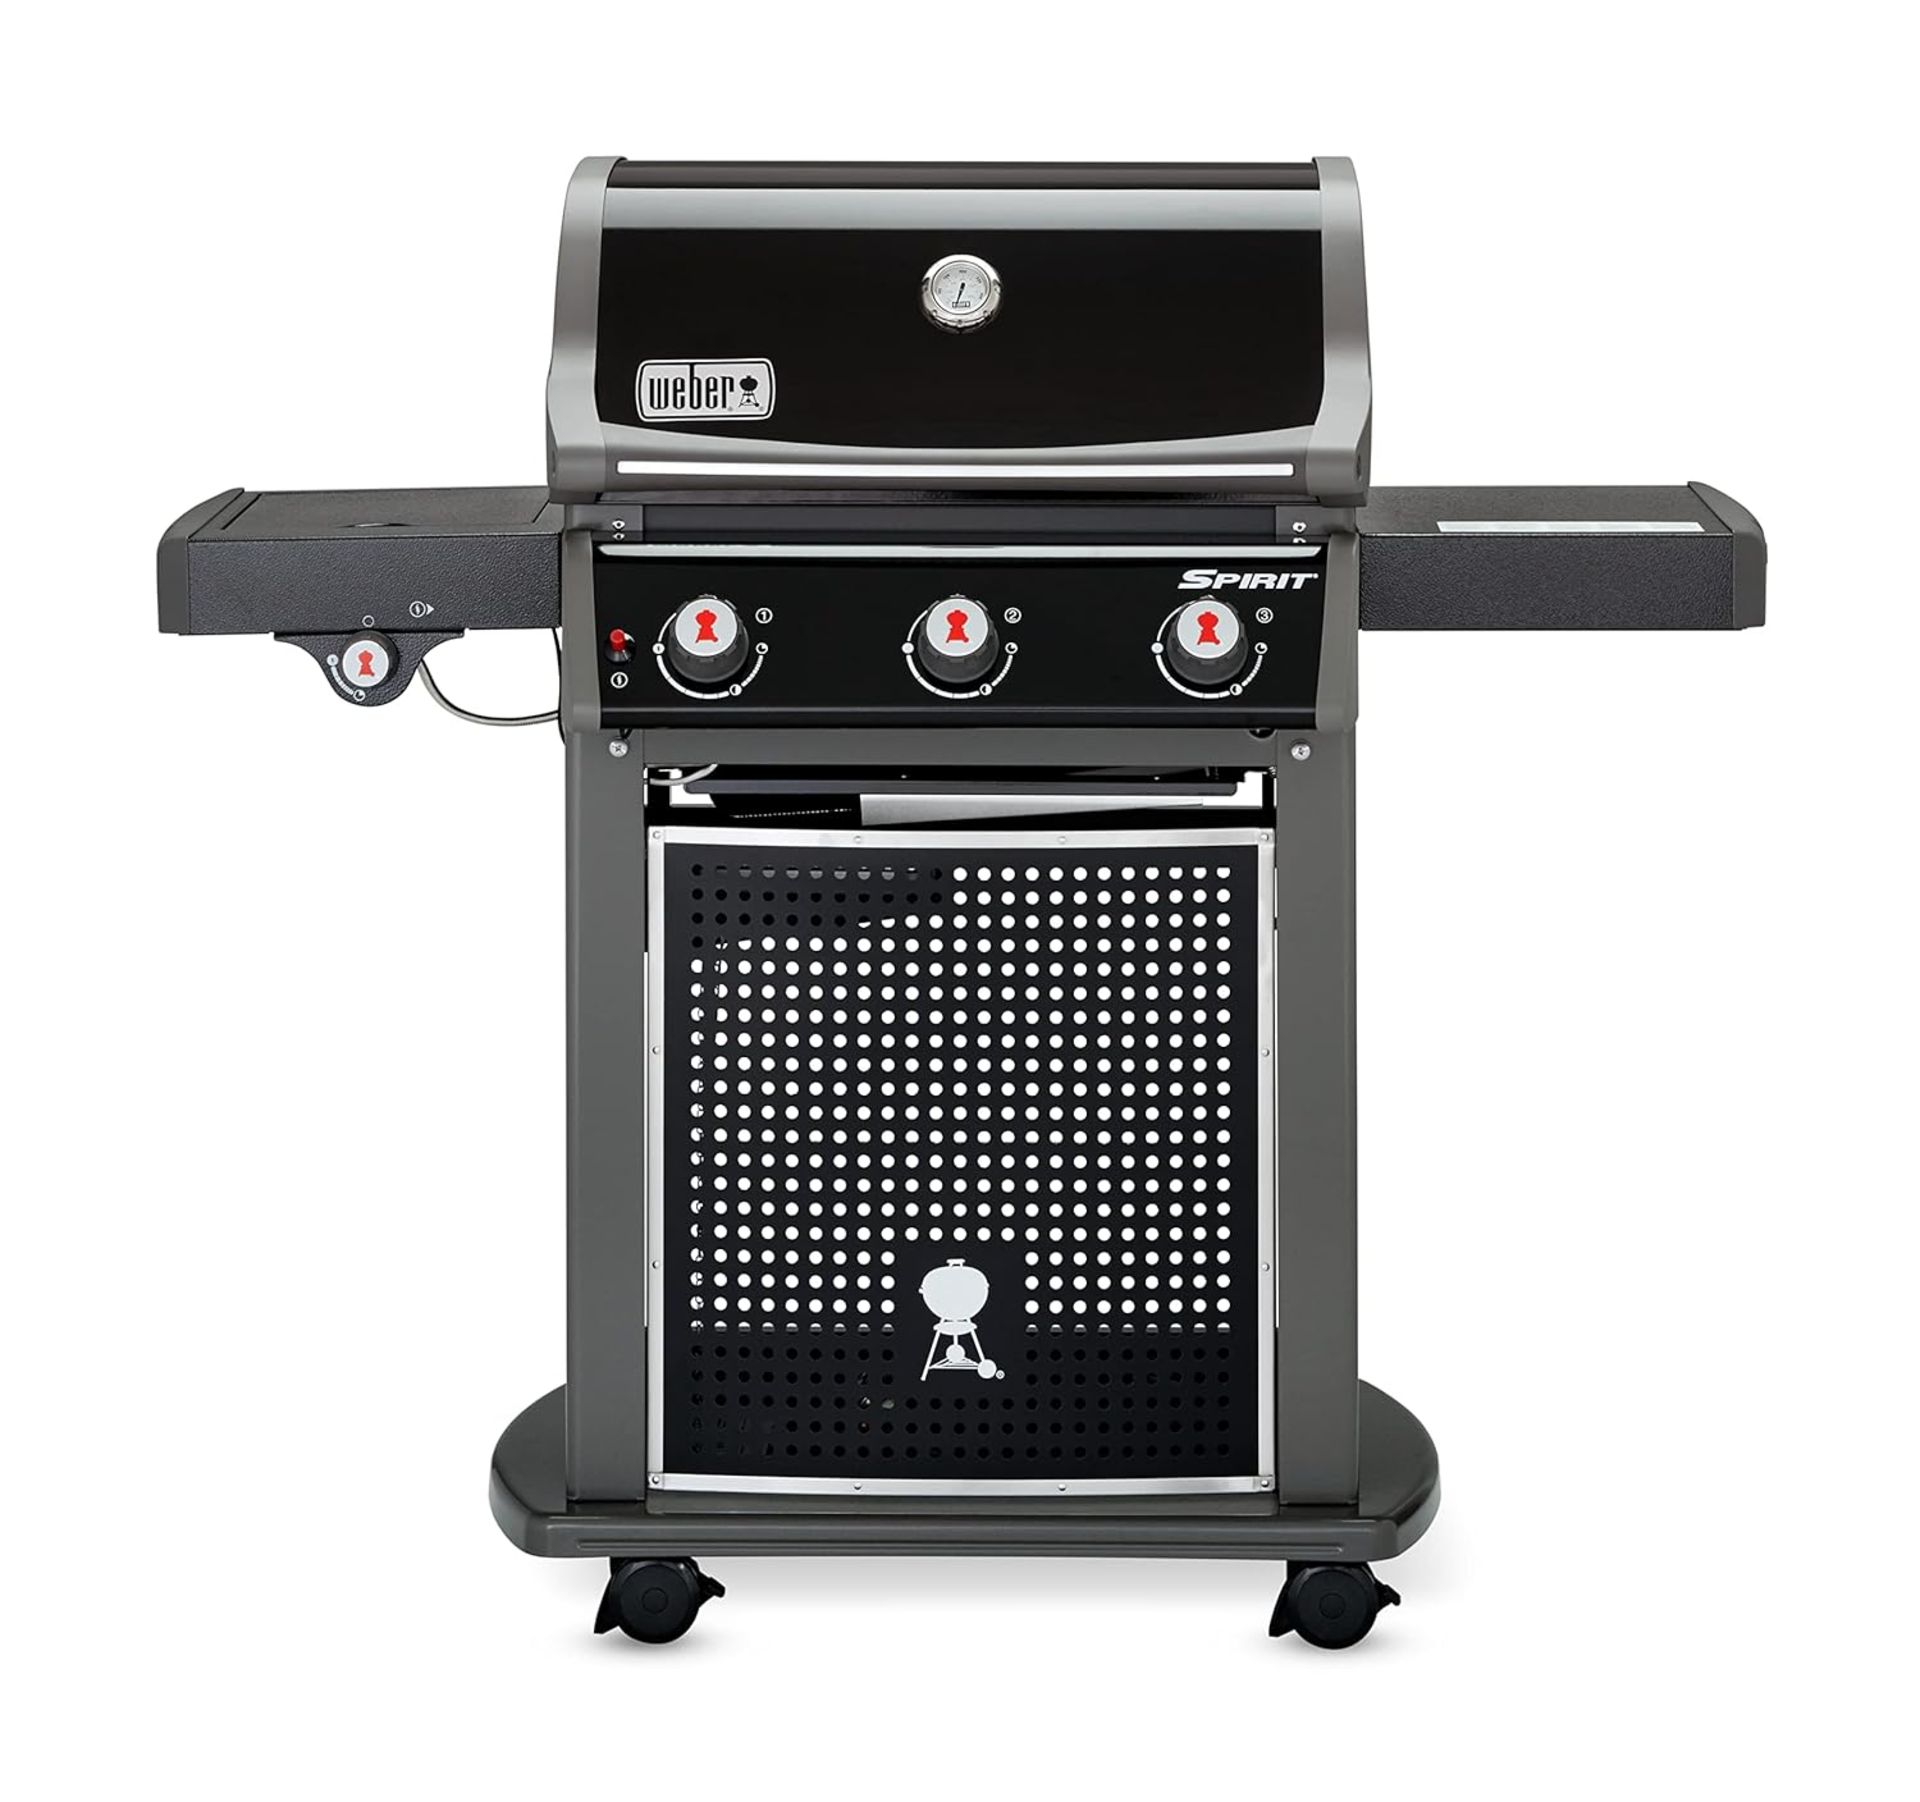 NEW & BOXED WEBER E-320 Classic Gas Barbecue. RRP £745. (R18-4). The Weber Spirit Classic E320 is